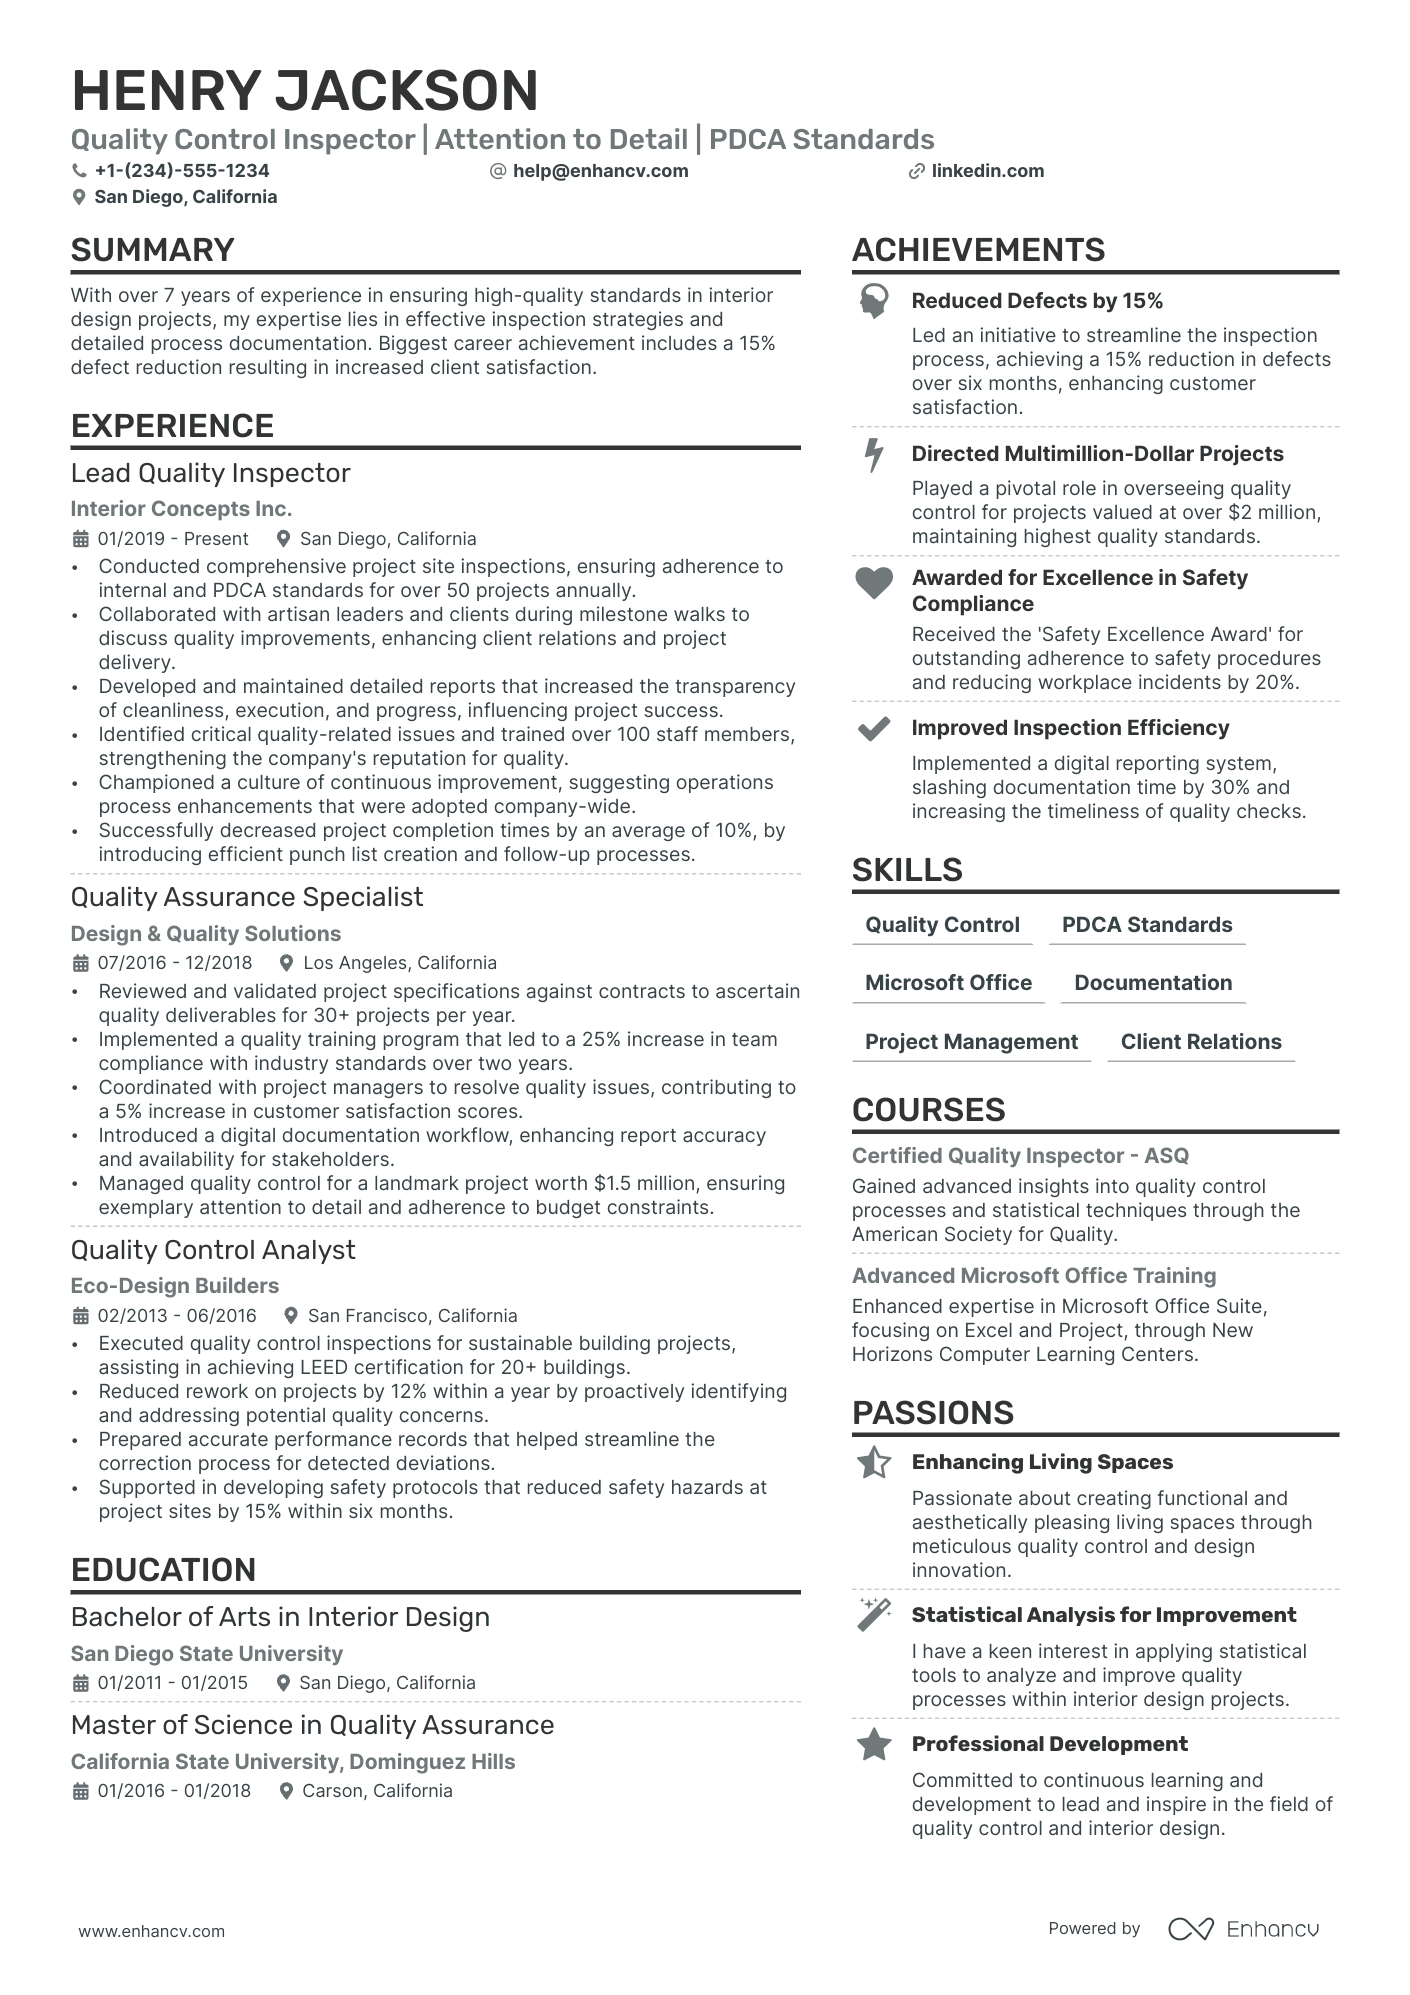 Quality Control Inspector resume example